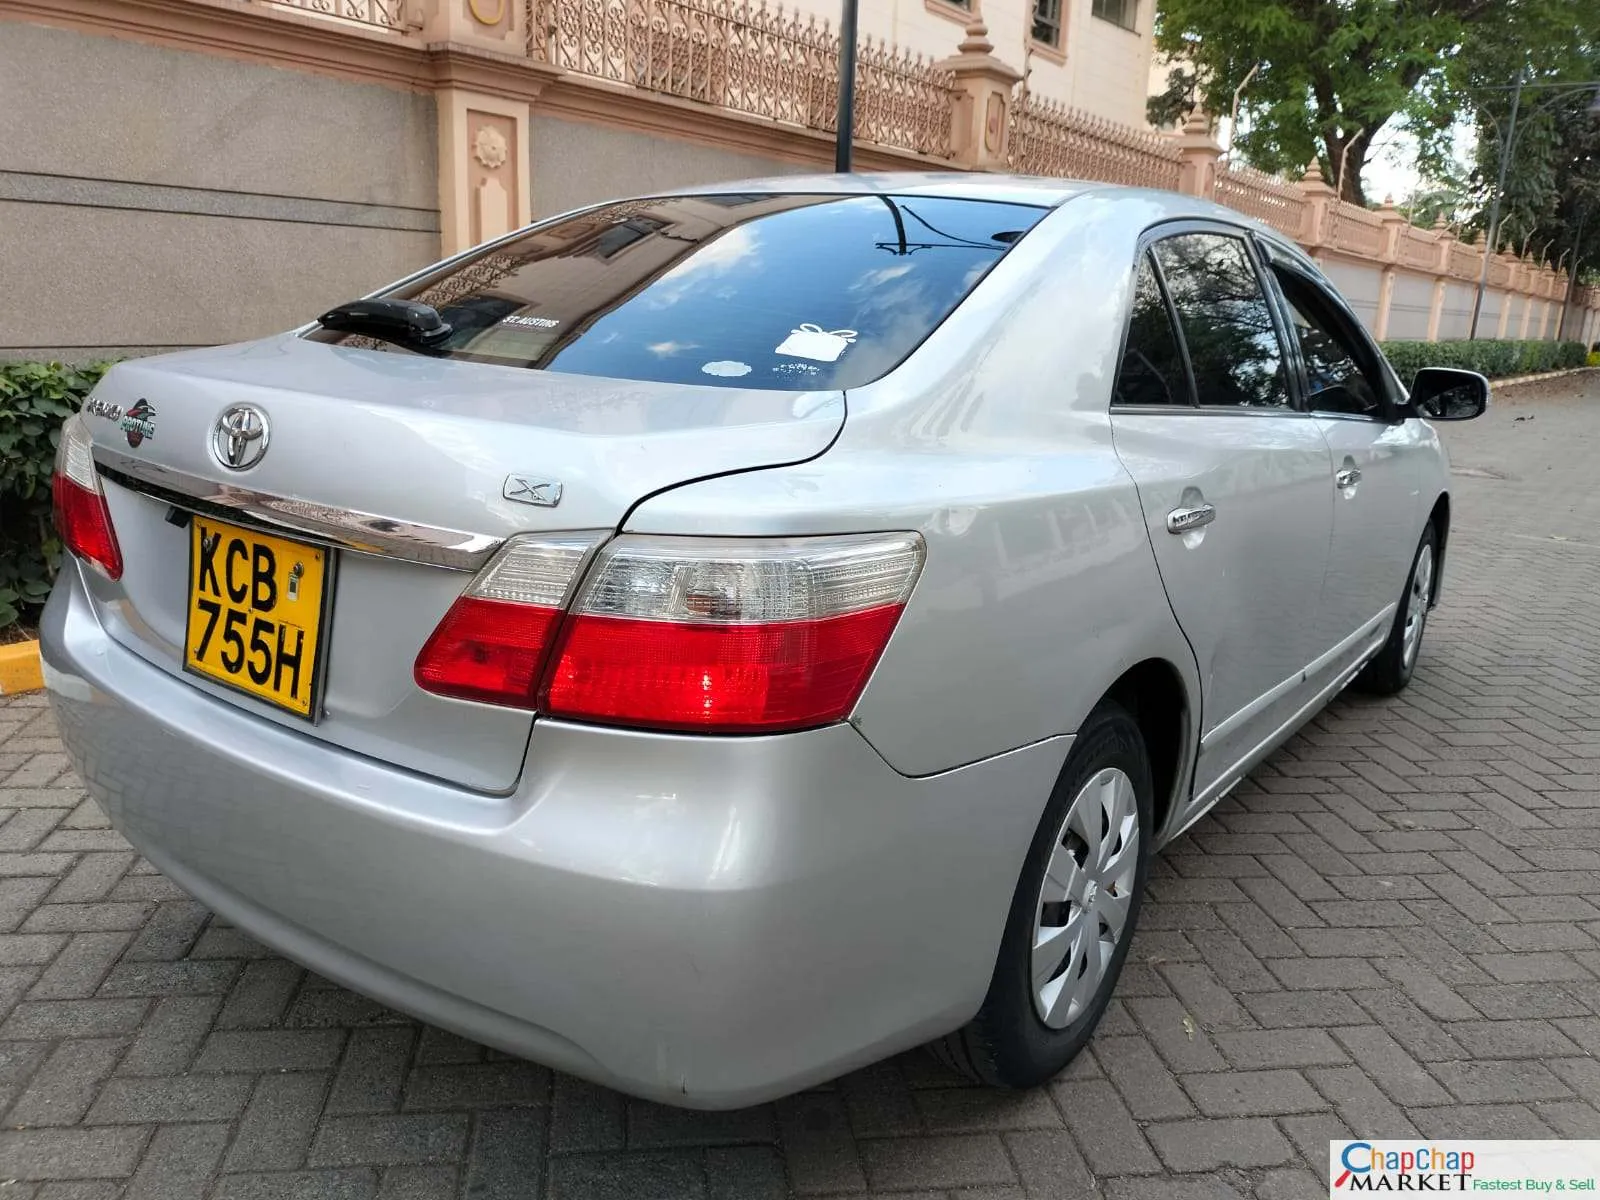 Toyota PREMIO for sale in Kenya hire purchase installments You pay 30% Deposit Trade in Ok EXCLUSIVE premio kenya 260 new shape (SOLD)